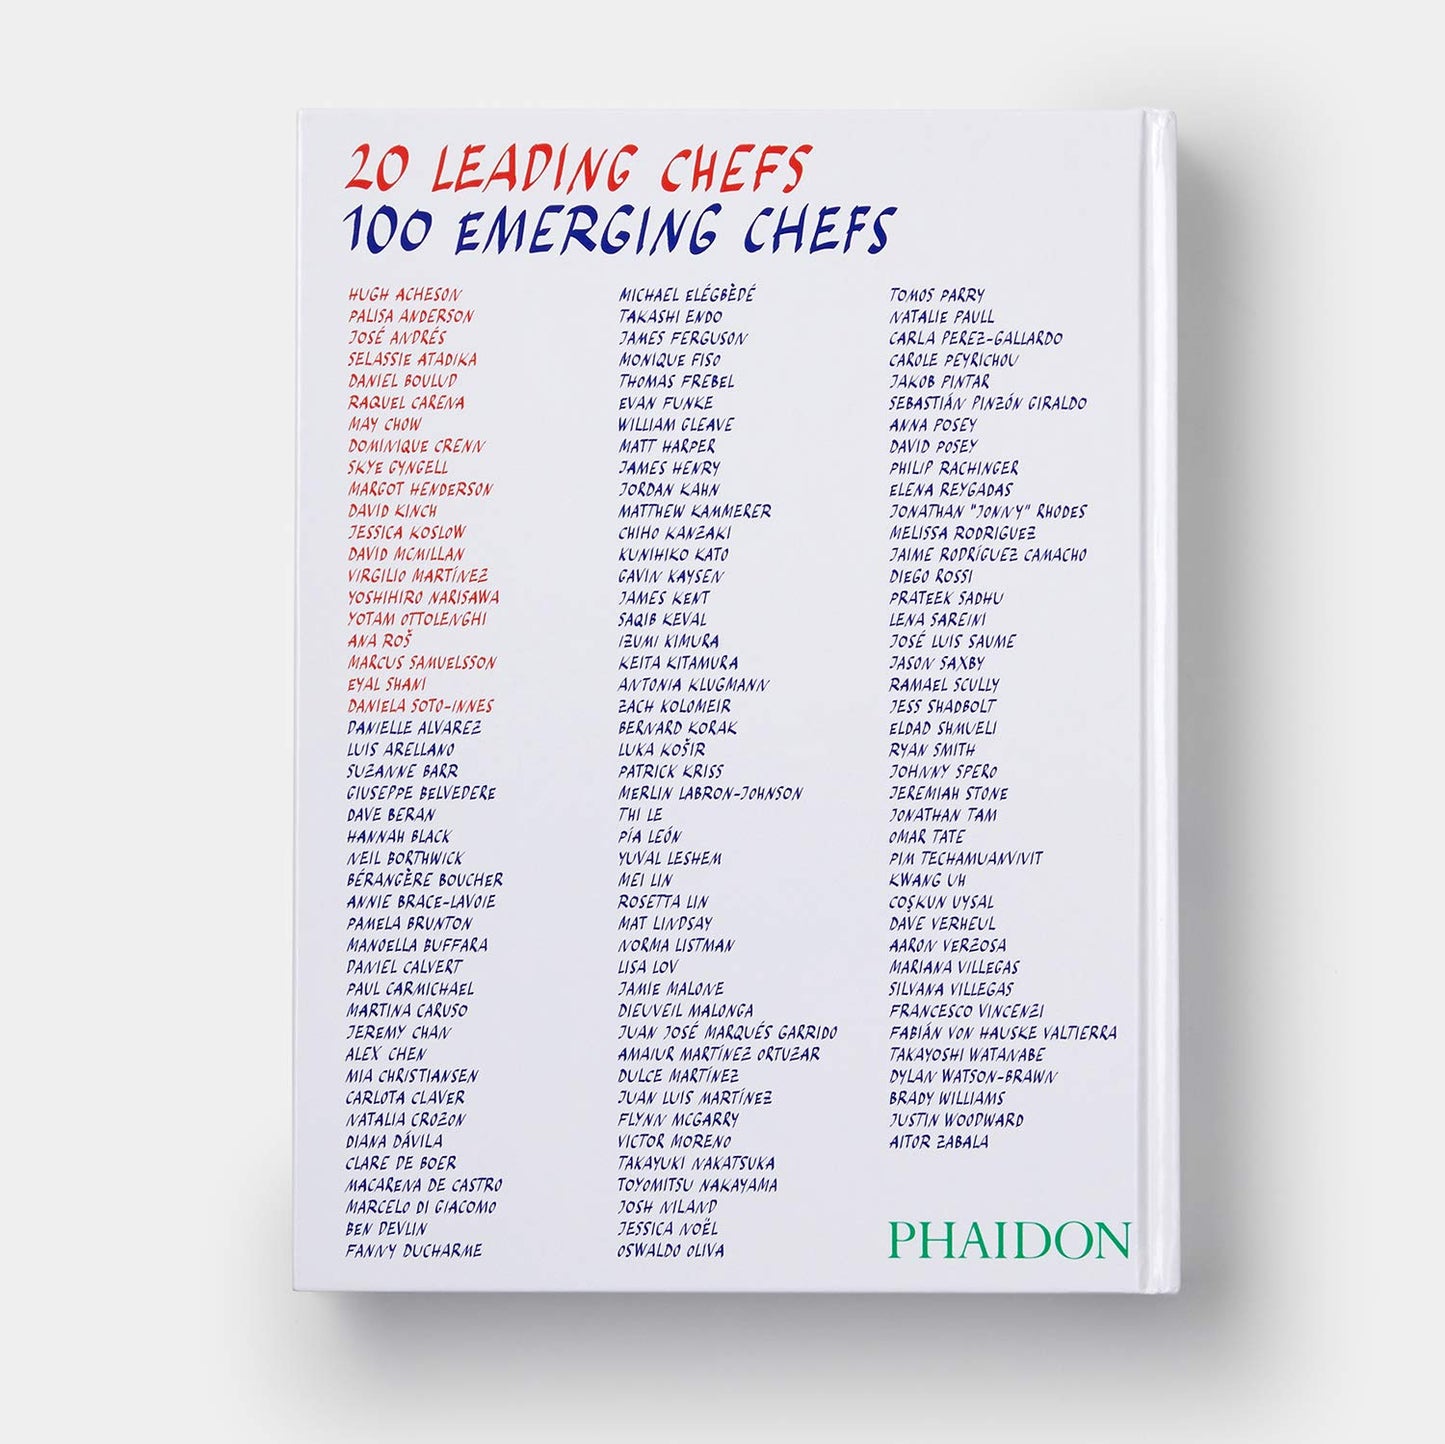 Today´s Special: 20 Leading Chefs Choose 100 Emerging Chefs